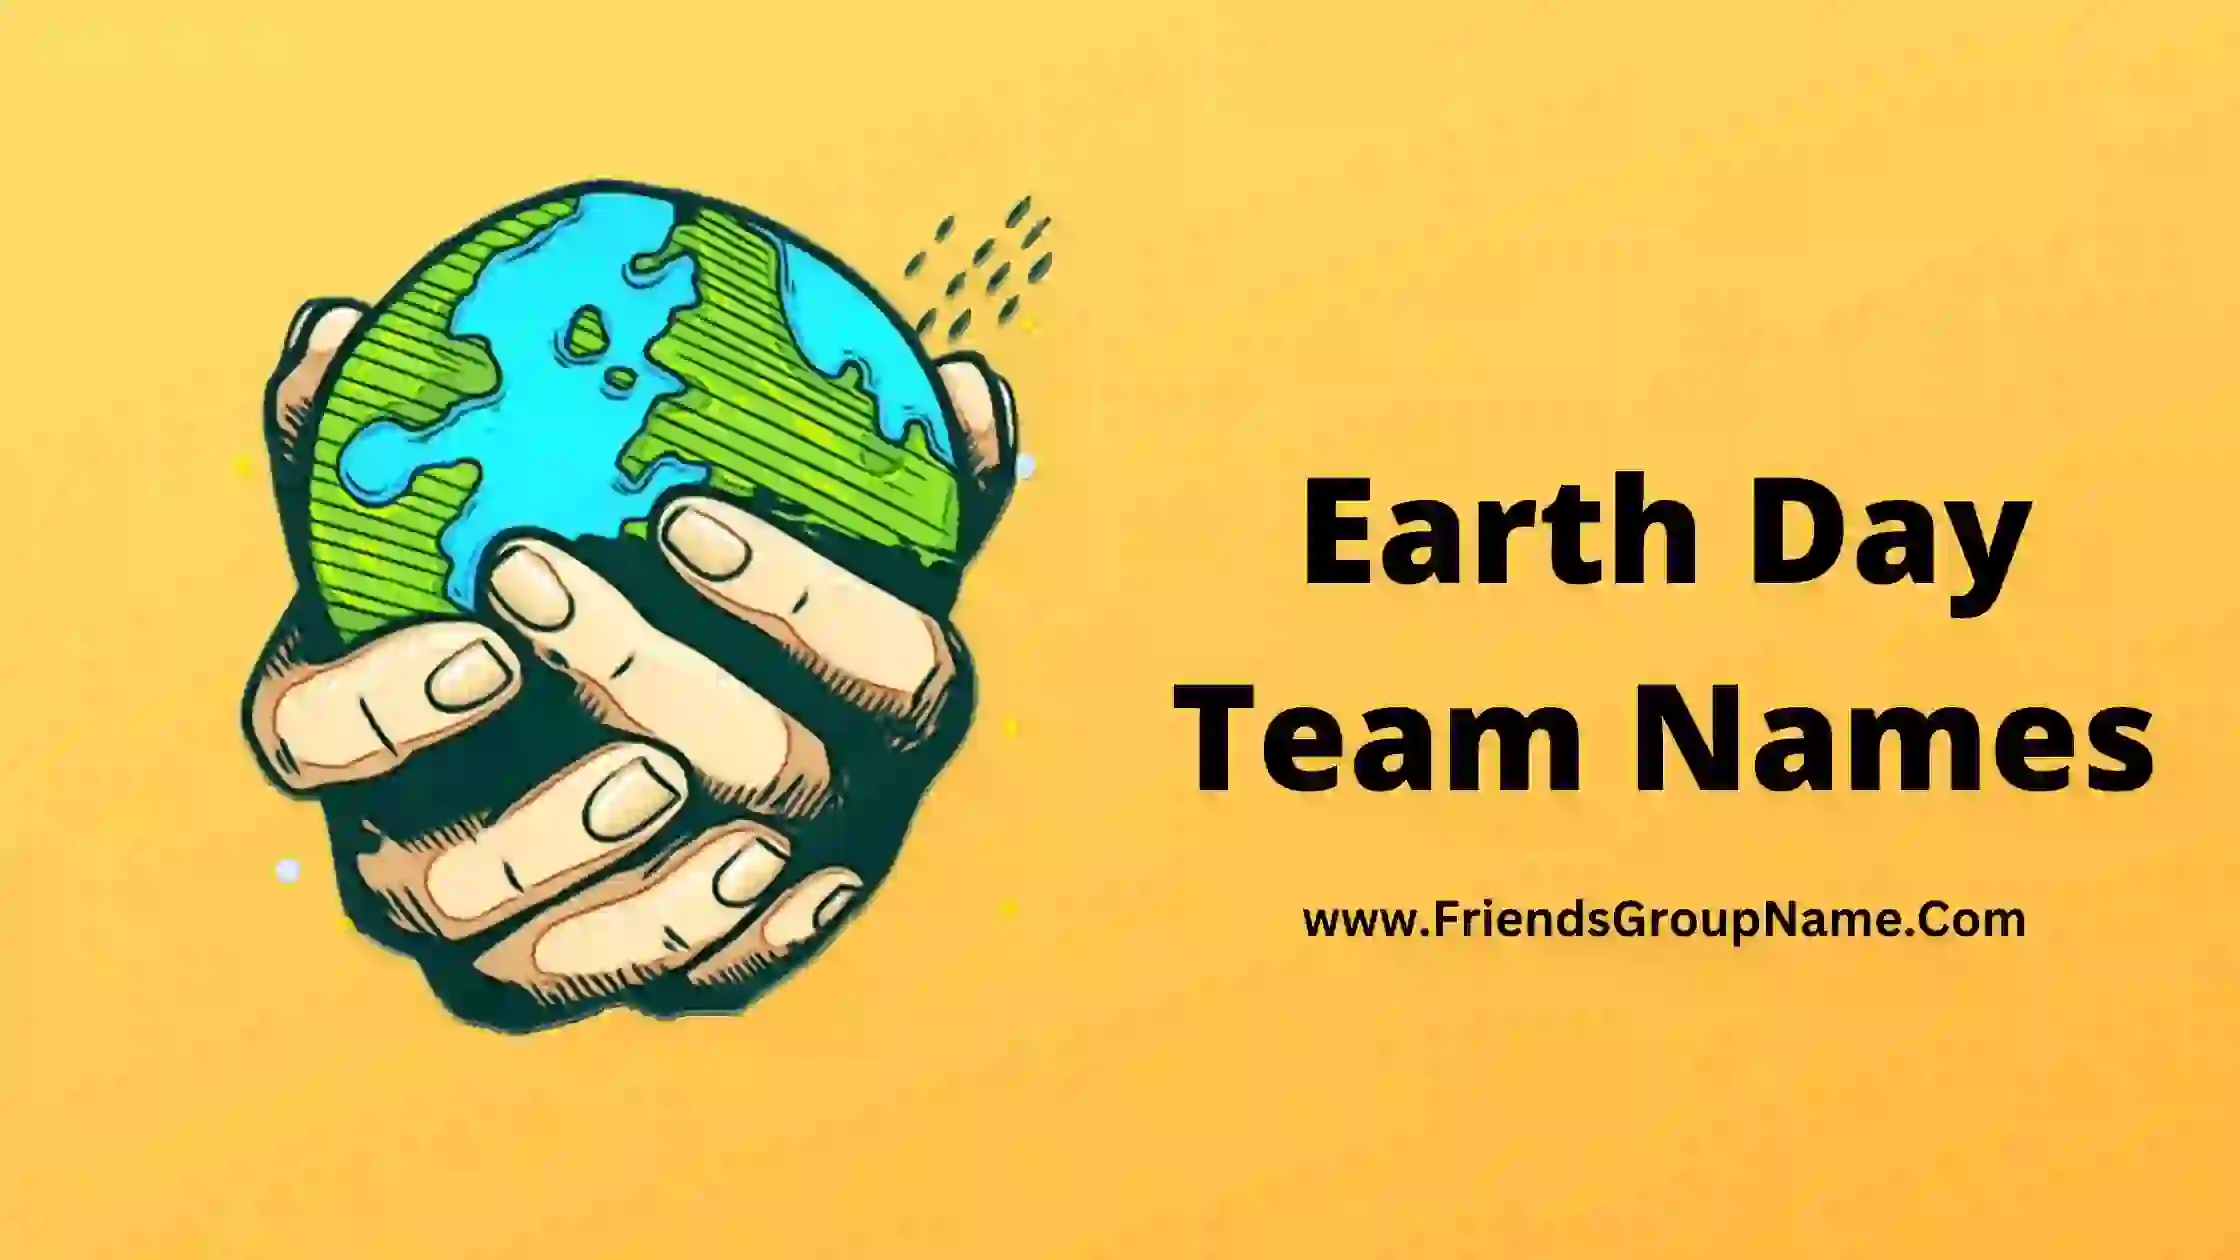 Earth Day Team Names